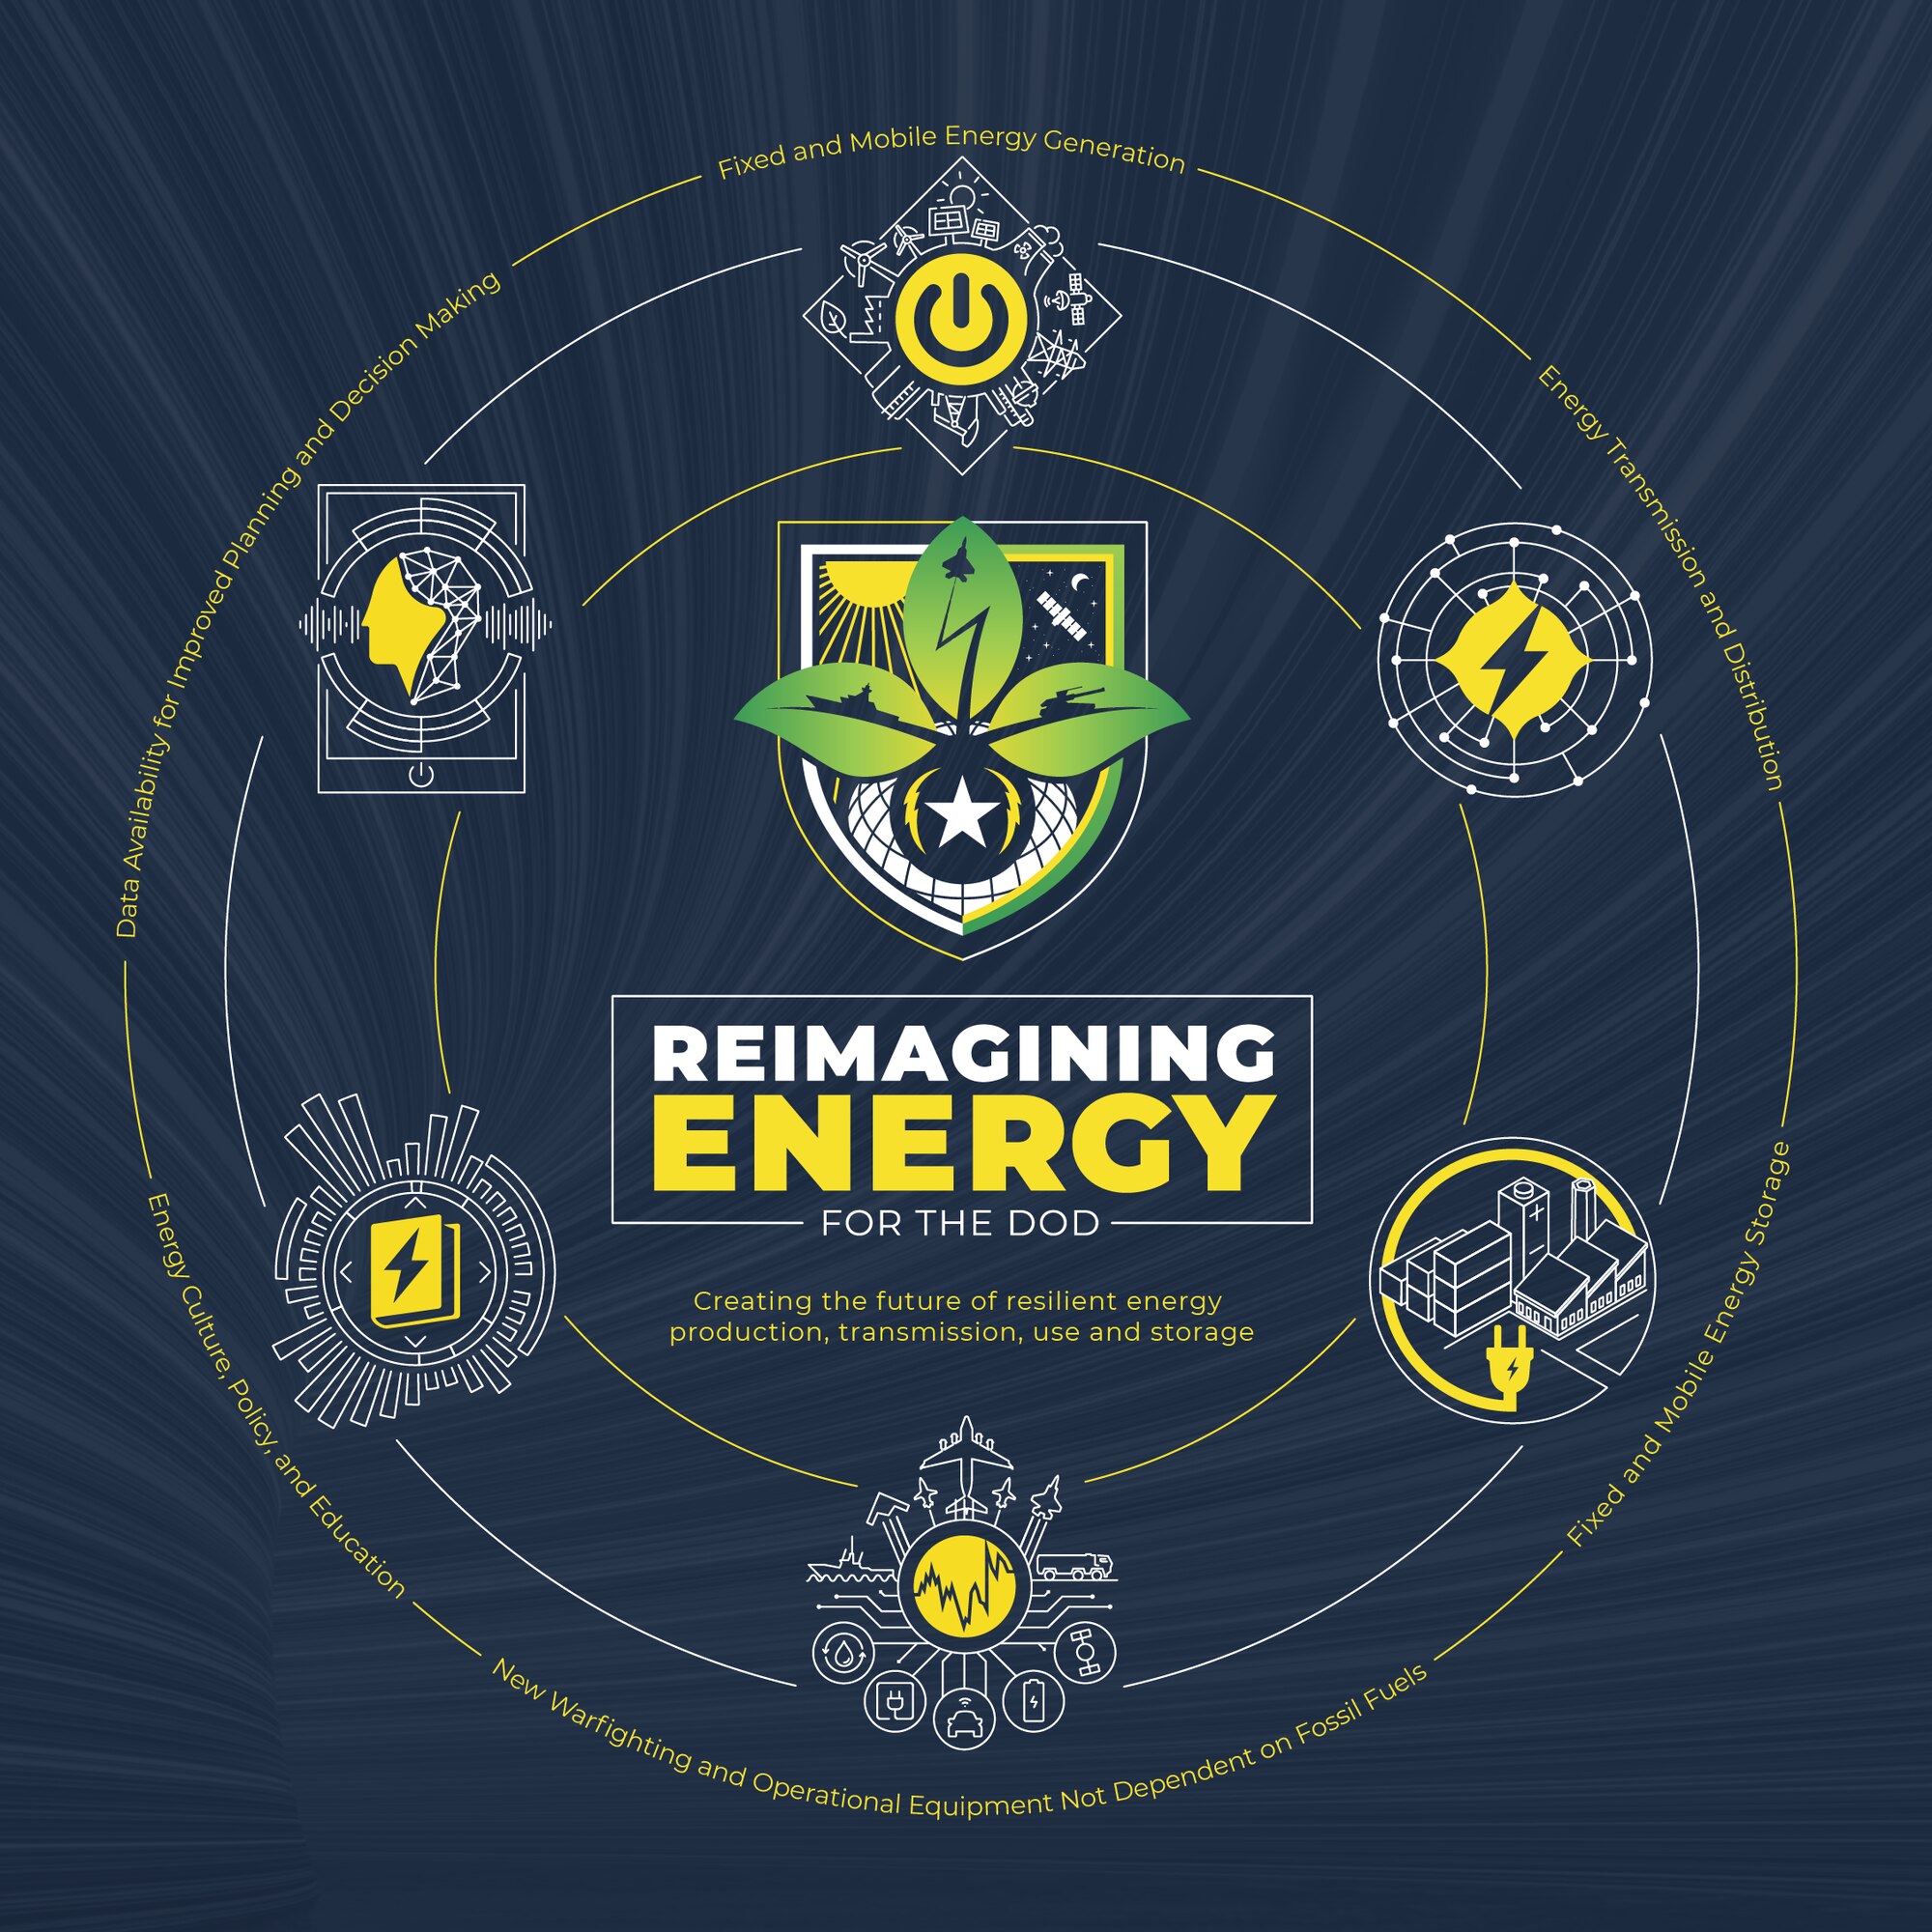 AFWERX, the Air Force’s innovation catalyst, announces the Reimagining Energy for the DOD Challenge, seeking solutions to create the future of resilient energy production, transmission, use and storage. (AFWERX courtesy graphic)